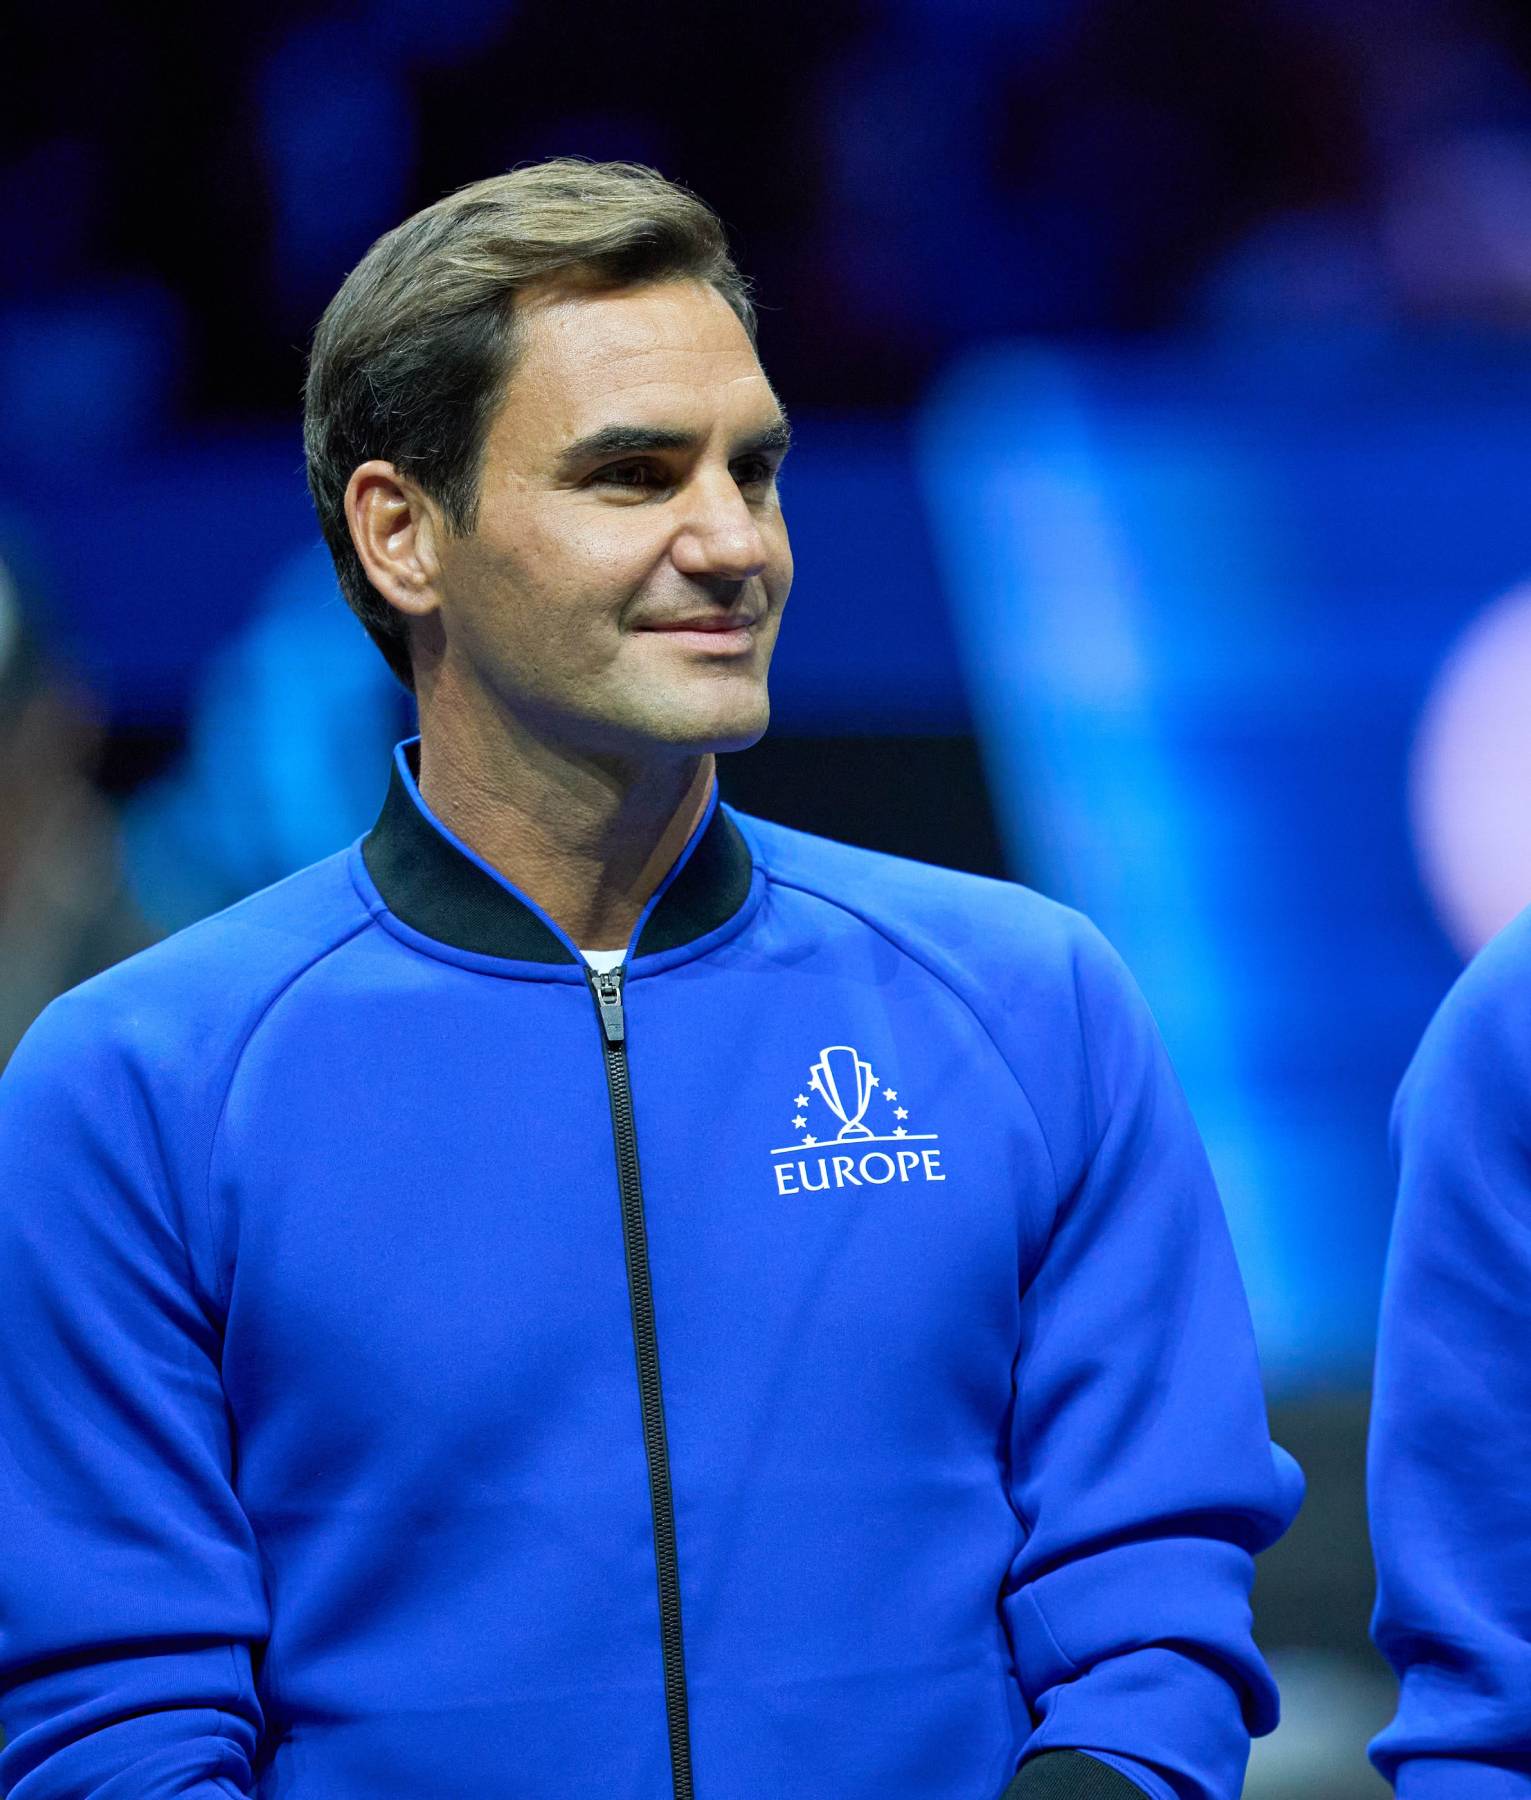 Europe Laver Cup Blue Jacket (1)